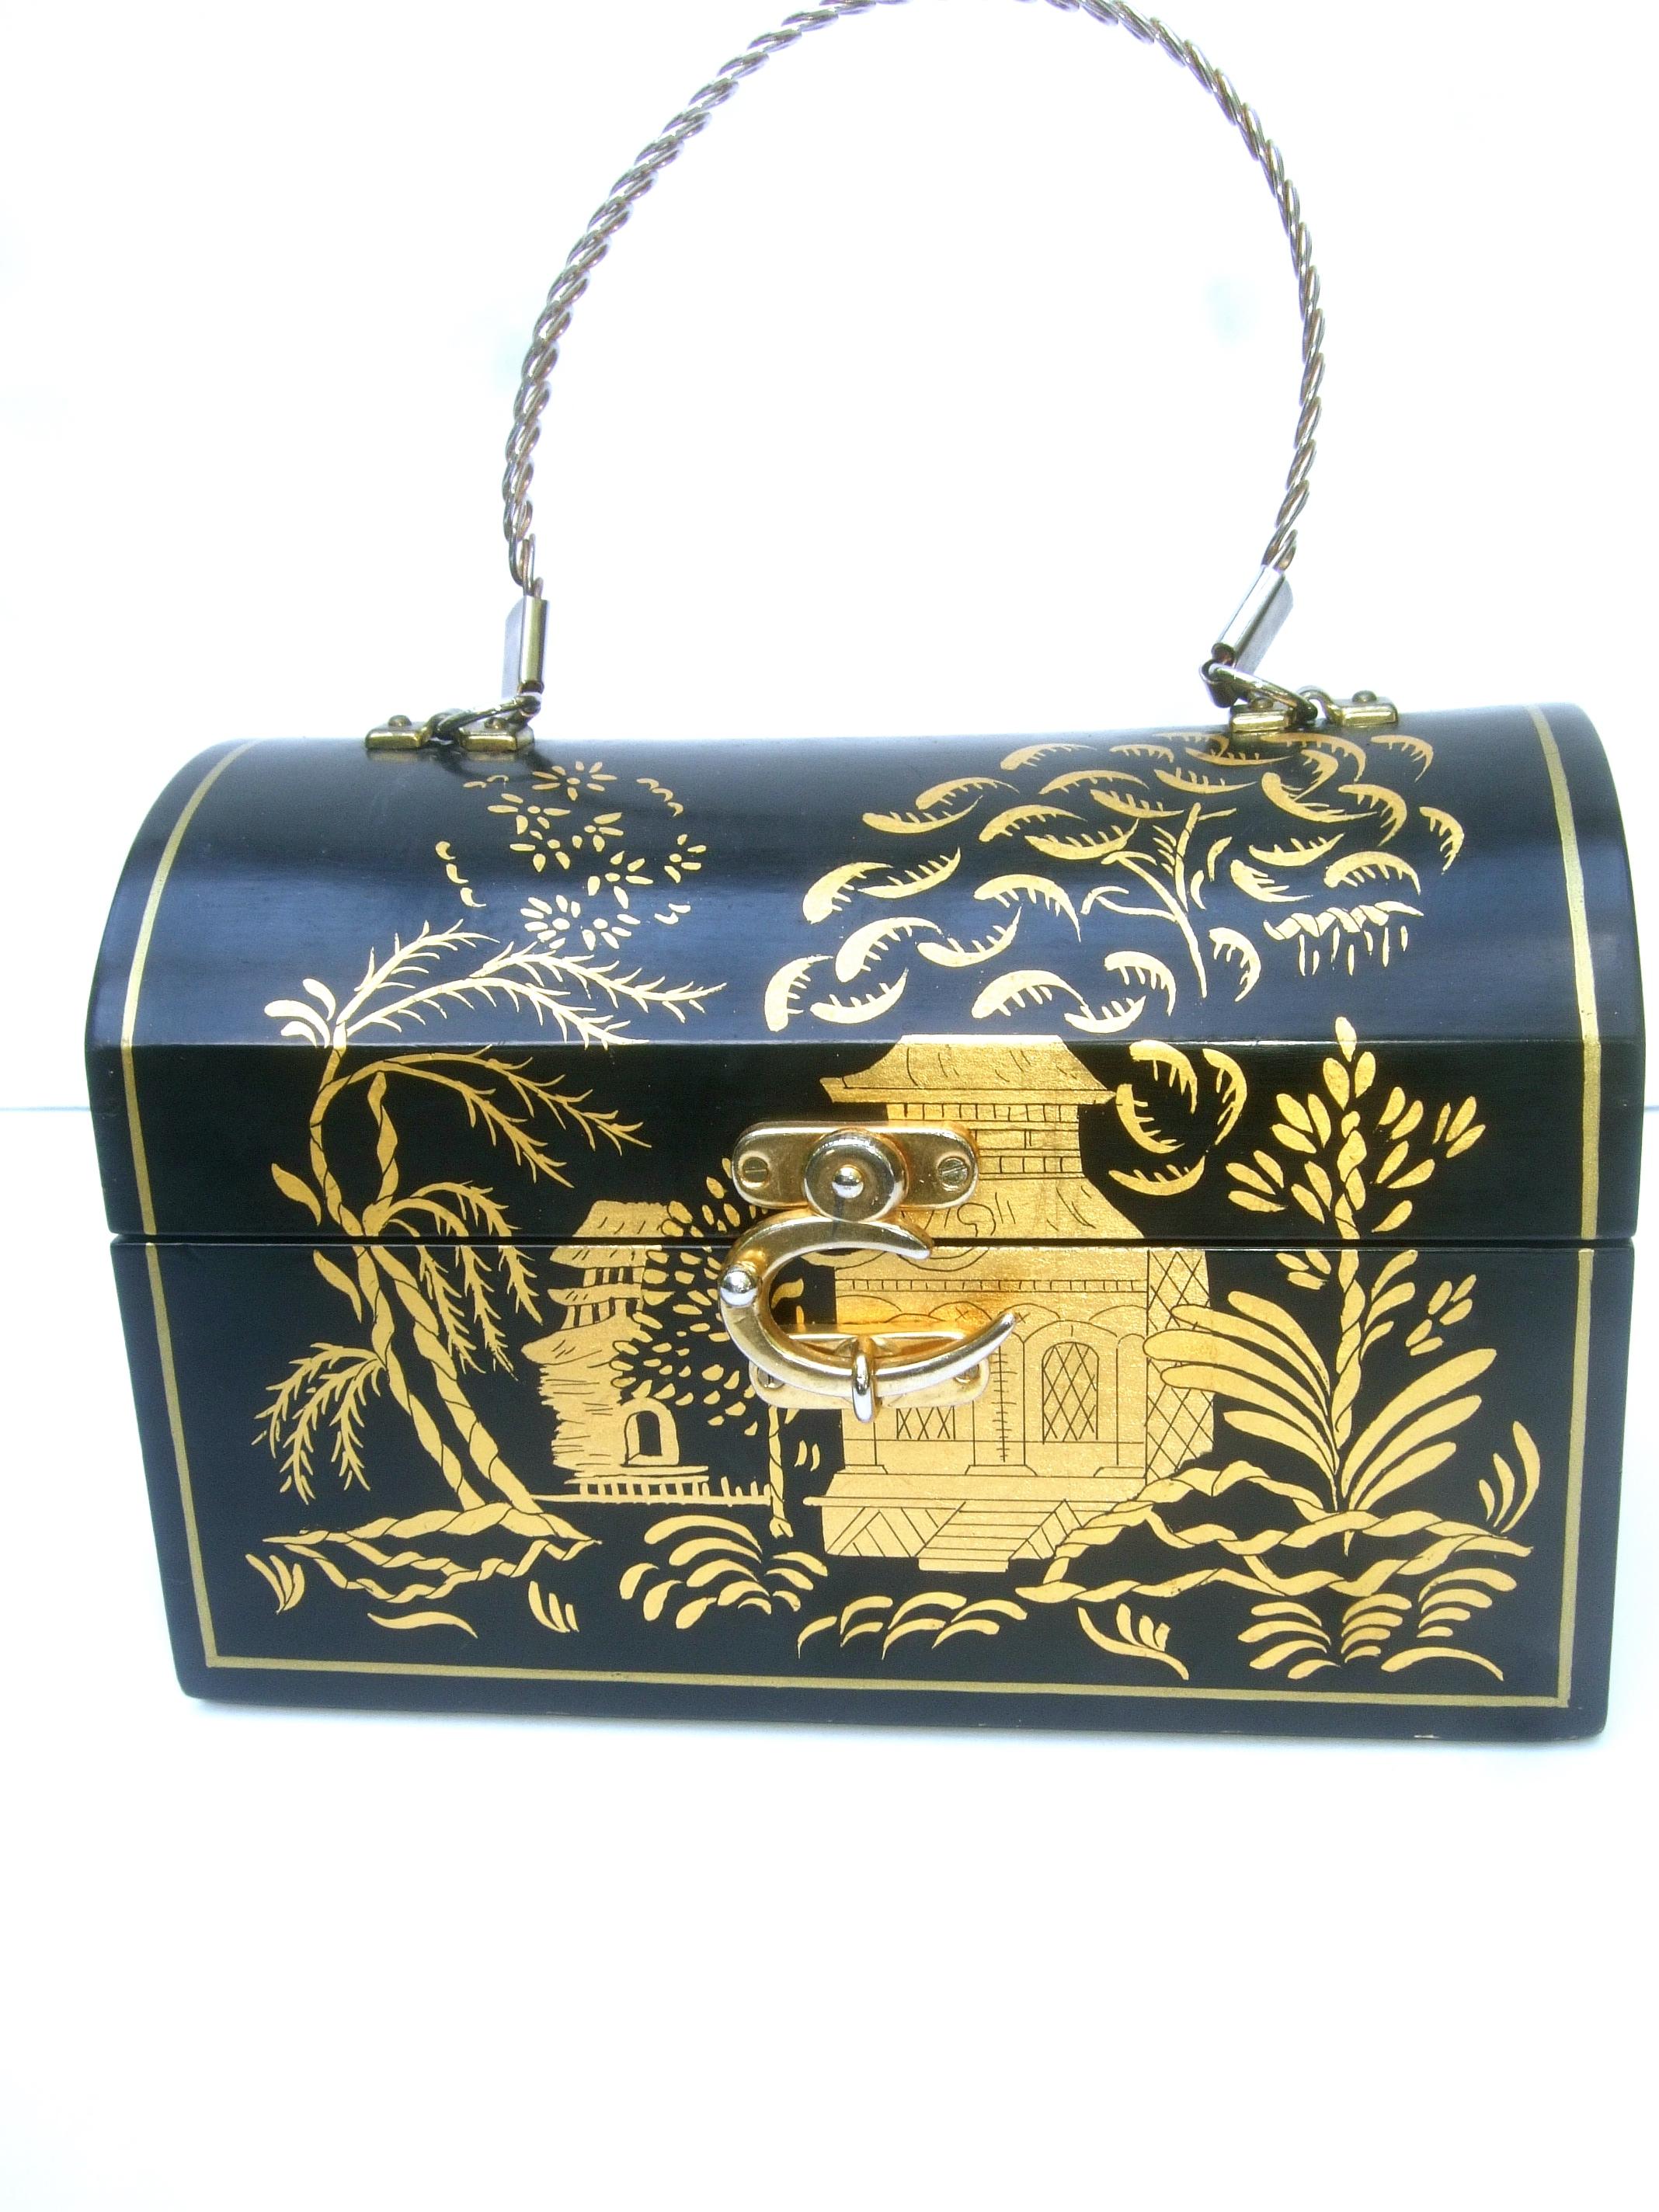 1970s Chinoiserie black & gold handpainted wood trunk box purse

The unique wood artisan box purse is embellished with a lush scene of exotic foliage & pagoda structures; illuminated against a black enamel background

Adorned with a sleek gilt metal